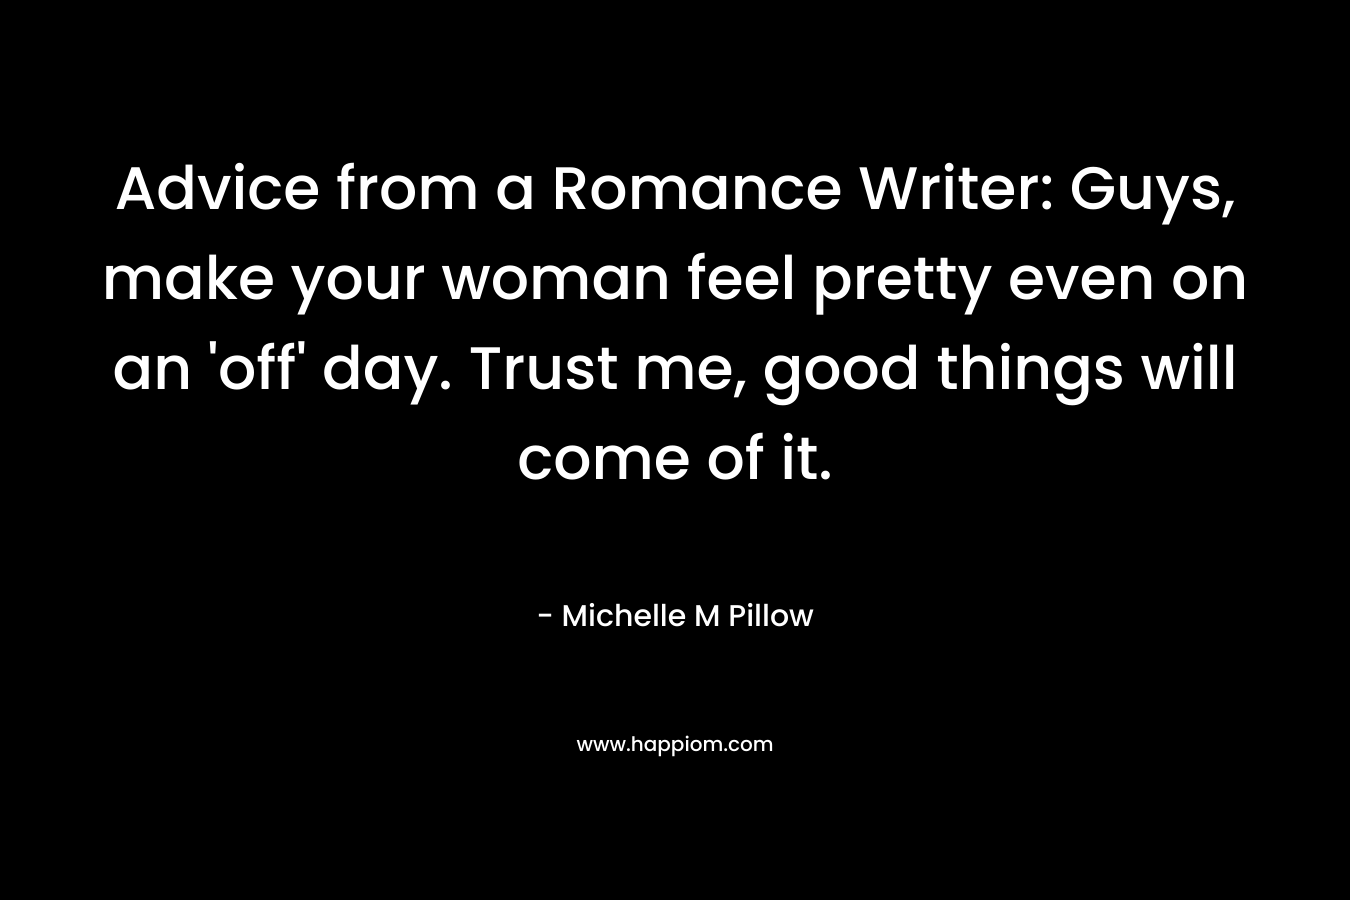 Advice from a Romance Writer: Guys, make your woman feel pretty even on an 'off' day. Trust me, good things will come of it.